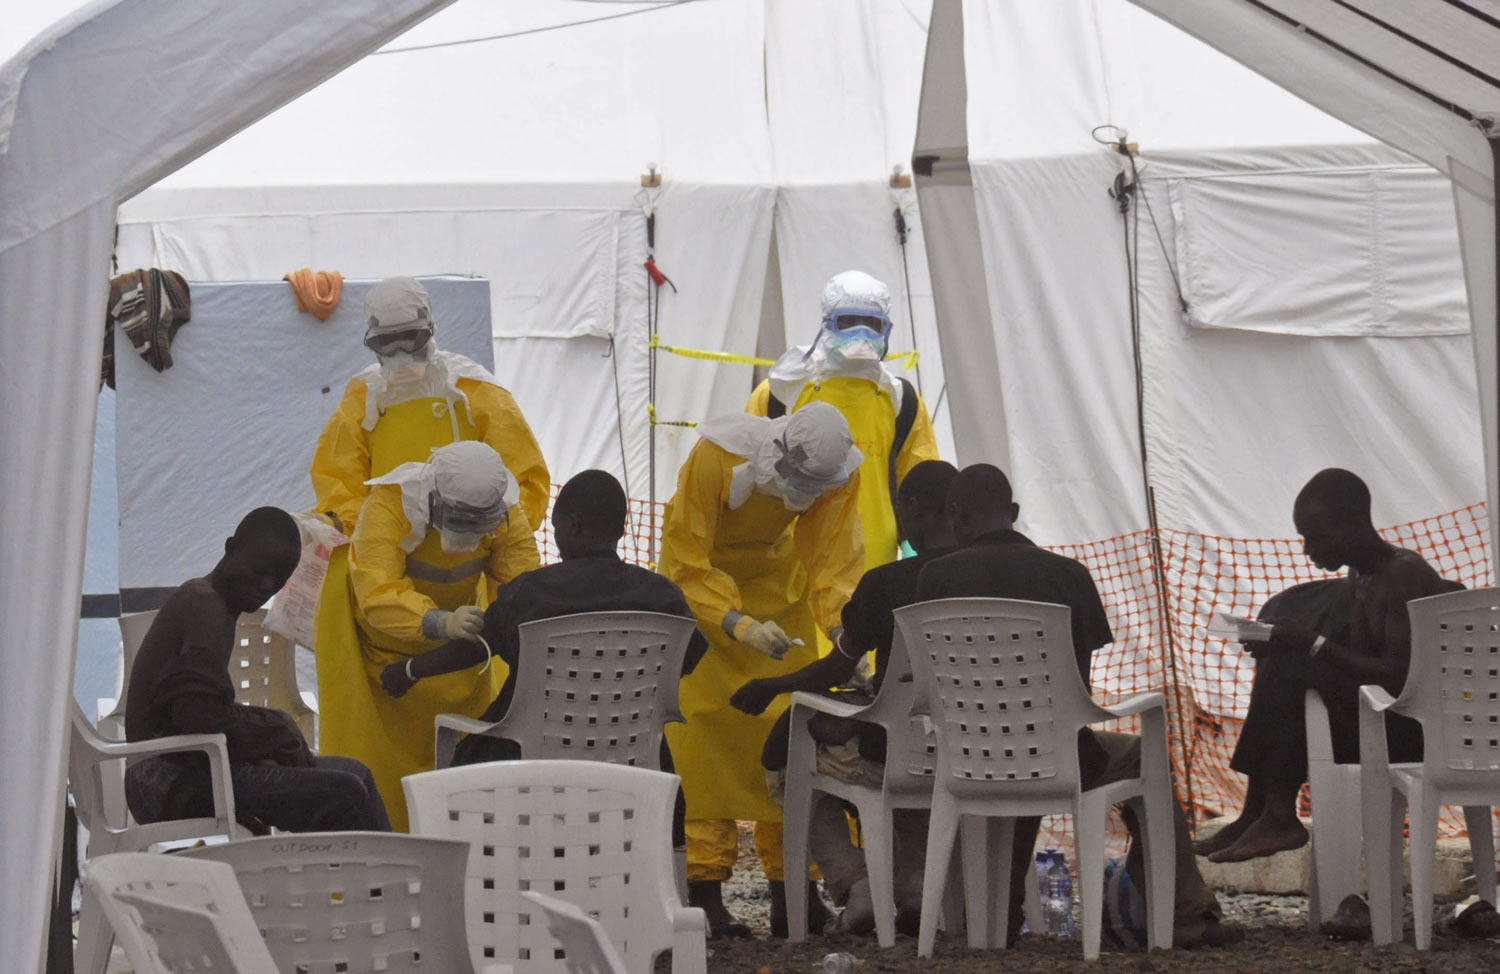 Health workers on Monday in Monrovia, Liberia, attend to patients who contracted the Ebola virus.